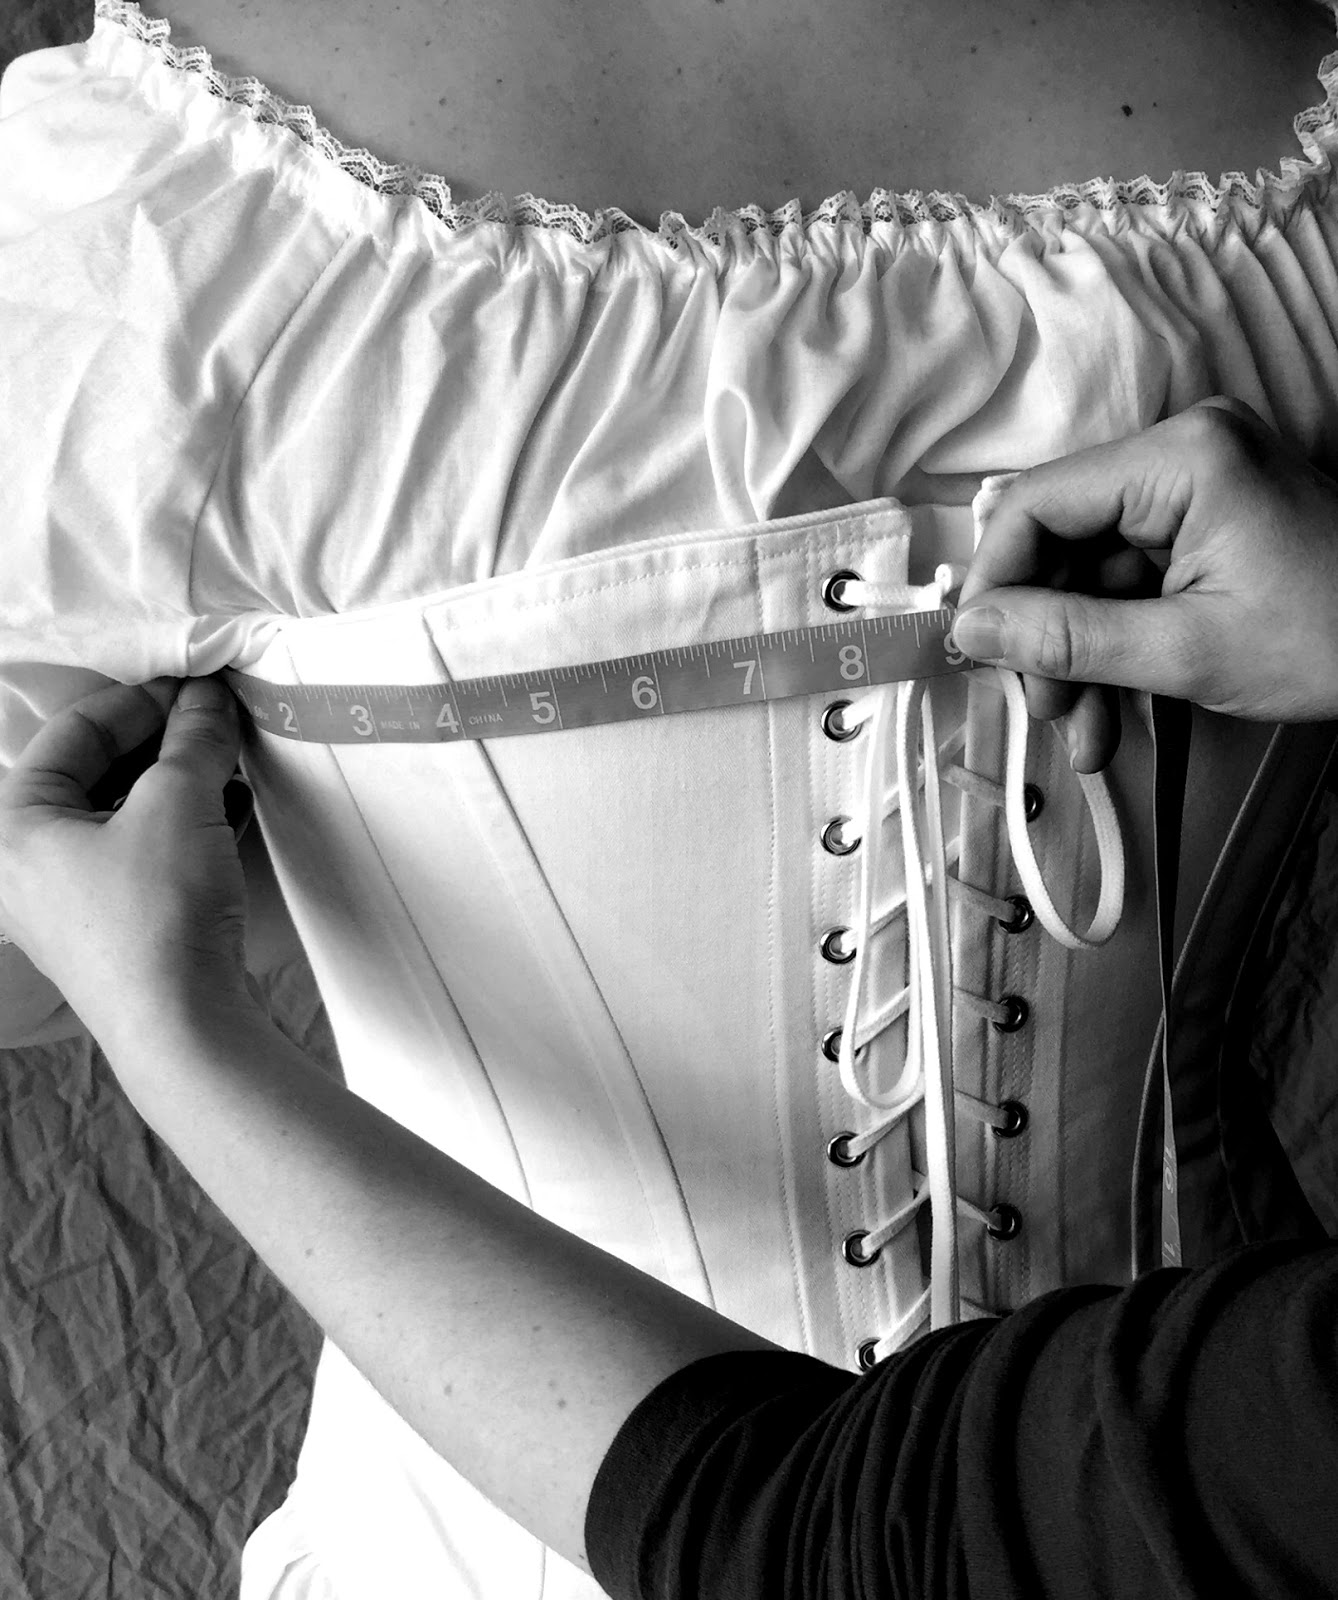 Period Corsets: A custom fit for every shape, the Period Corsets